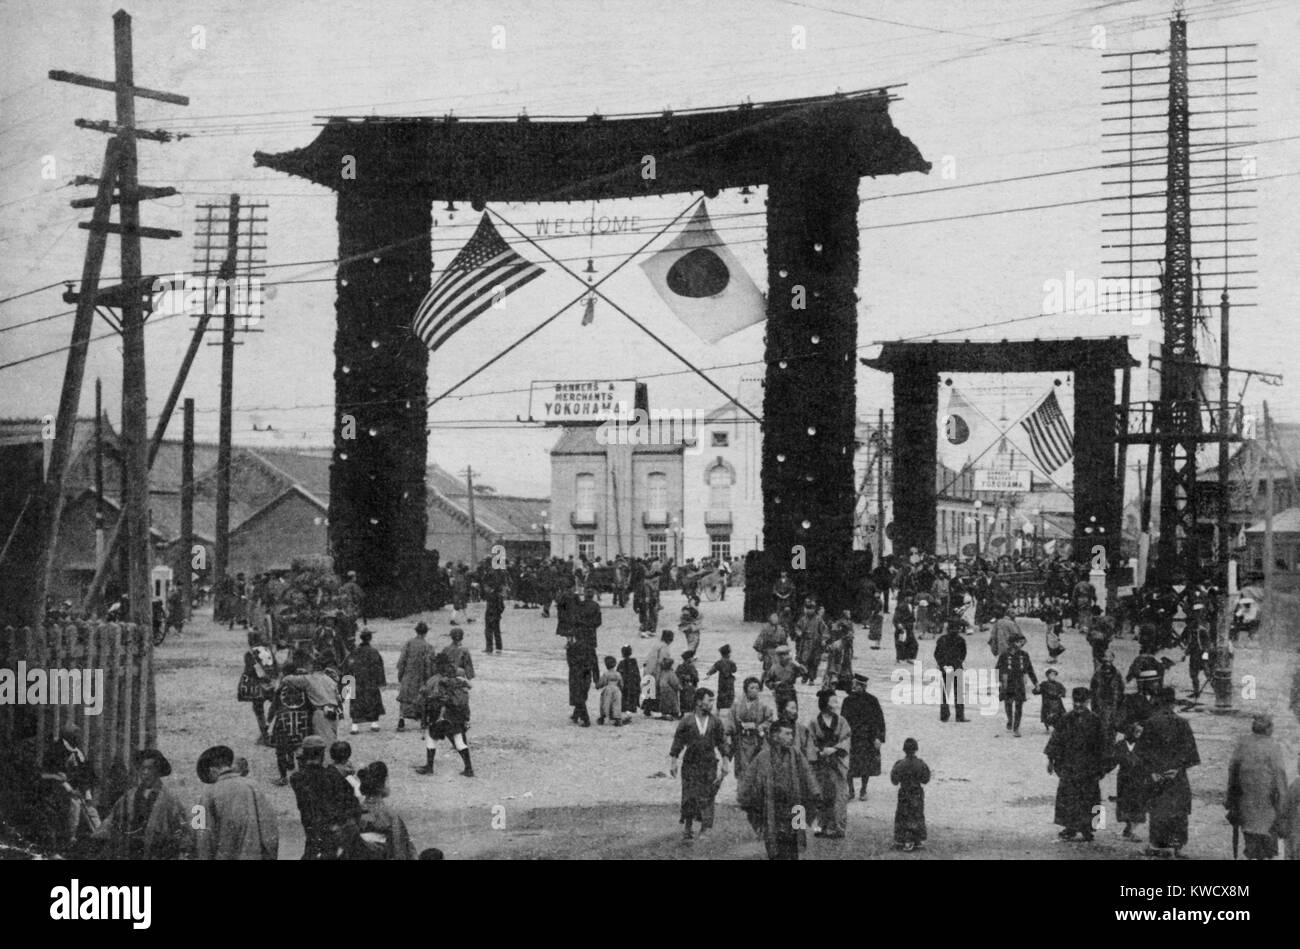 Decorated gates in Yokohama, with flags of the US and Japan, Oct. 1908. Japanese postcard commemorates the Great White Fleets visit. It posts a welcome sign in spite of tense relations between the US and Japan over Asian territory and bad treatment of Japanese in America (BSLOC_2017_2_86) Stock Photo